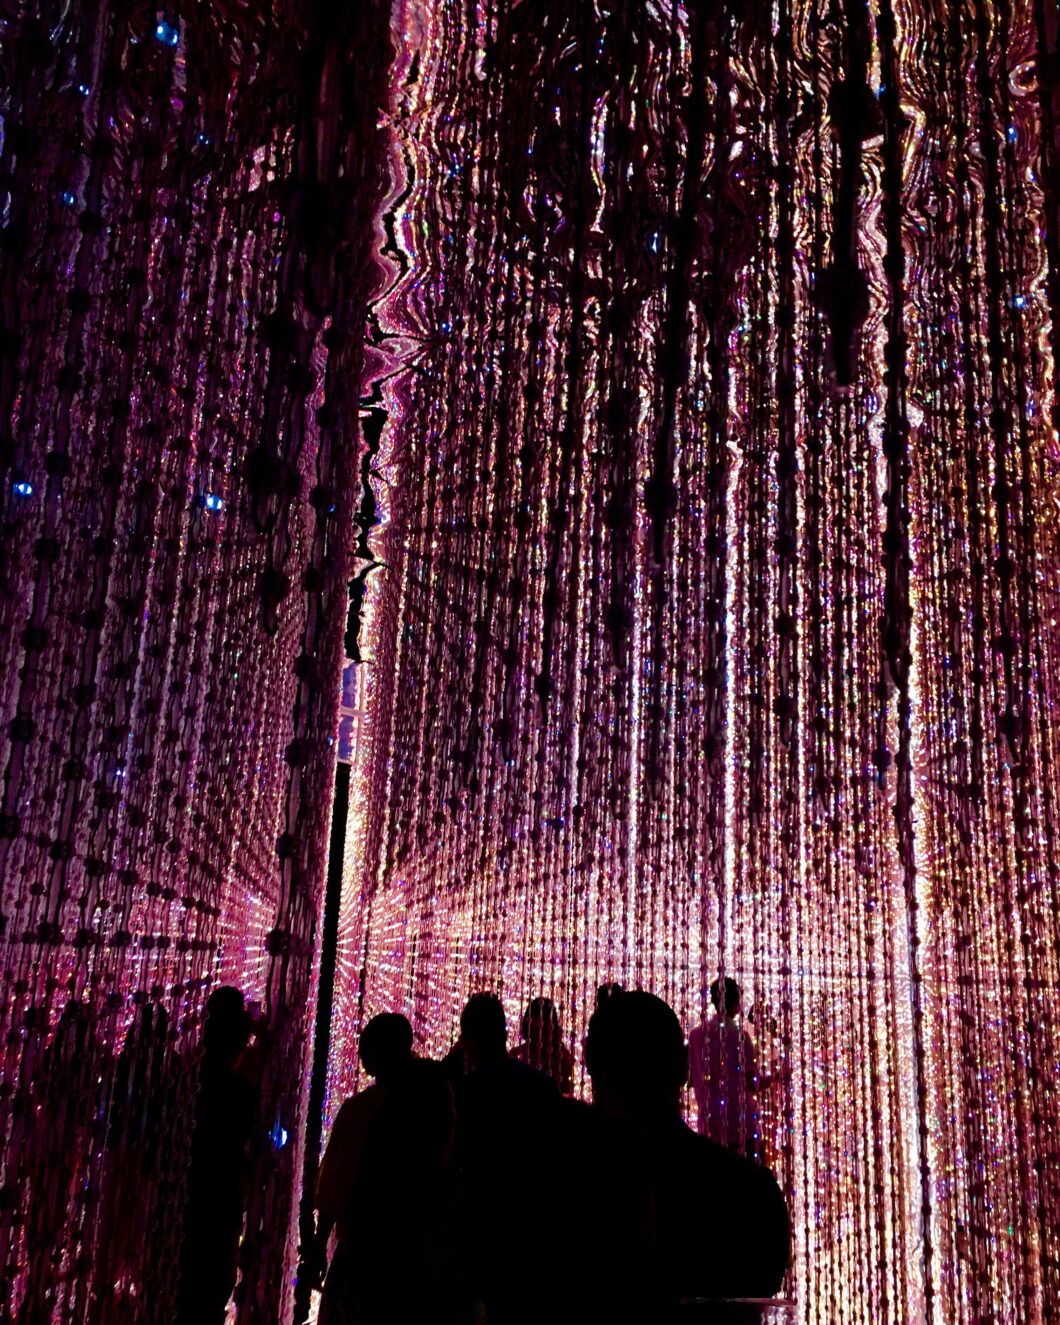 DMM.Planets Art: Tokyo’s “Crystal Universe”